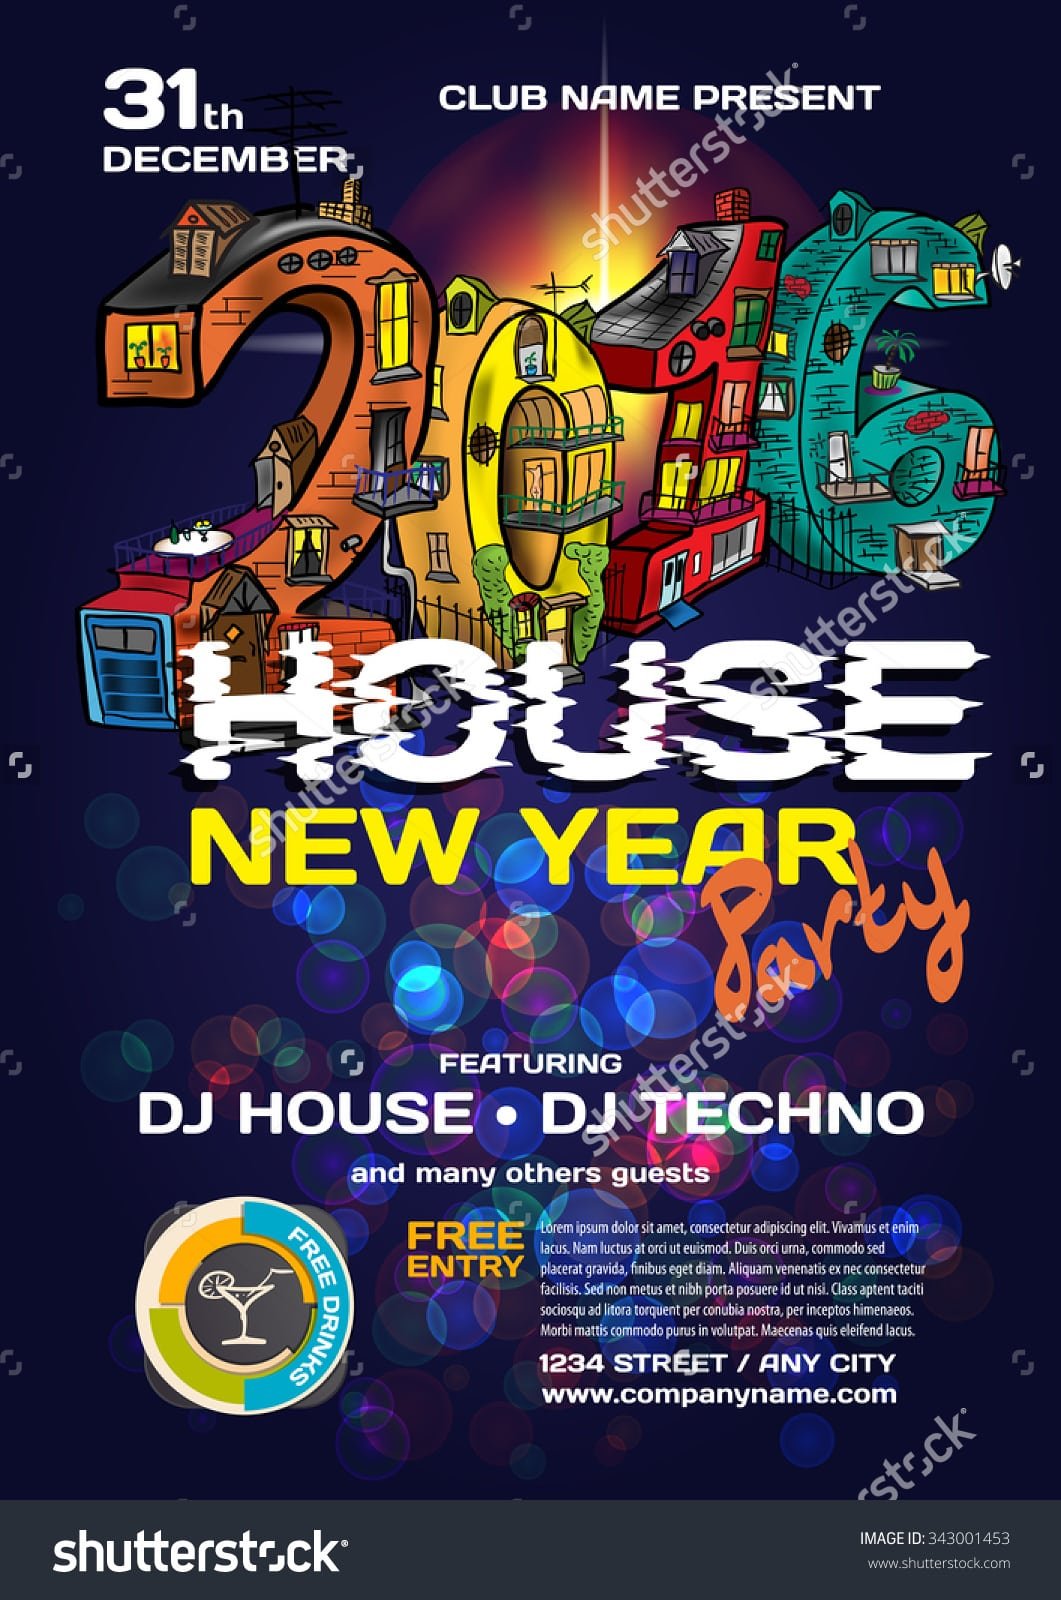 Vector New Year House Party Invitation Stock Vector 343001453